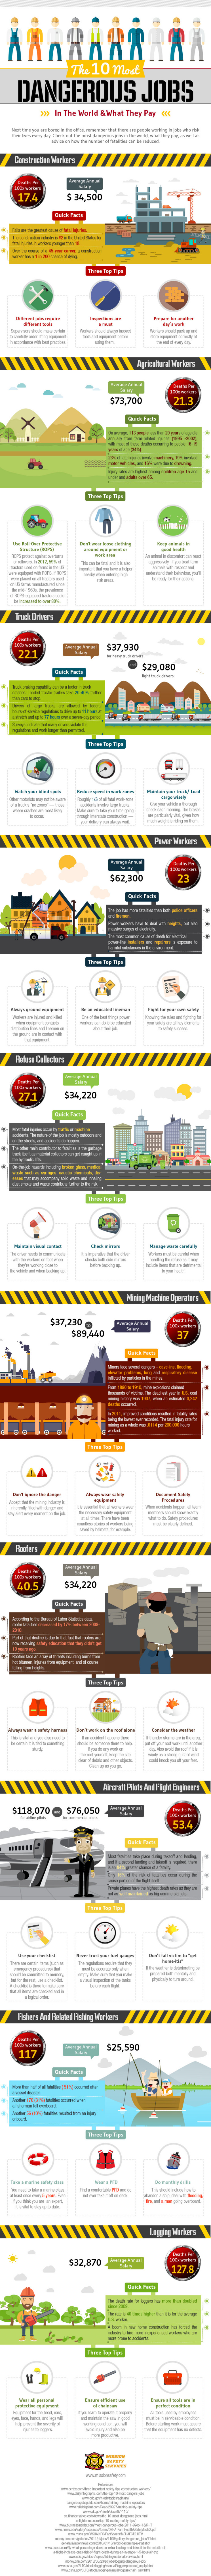 The-10-Most-Dangerous-Jobs-in-the-World-What-They-Pay-An-infographic